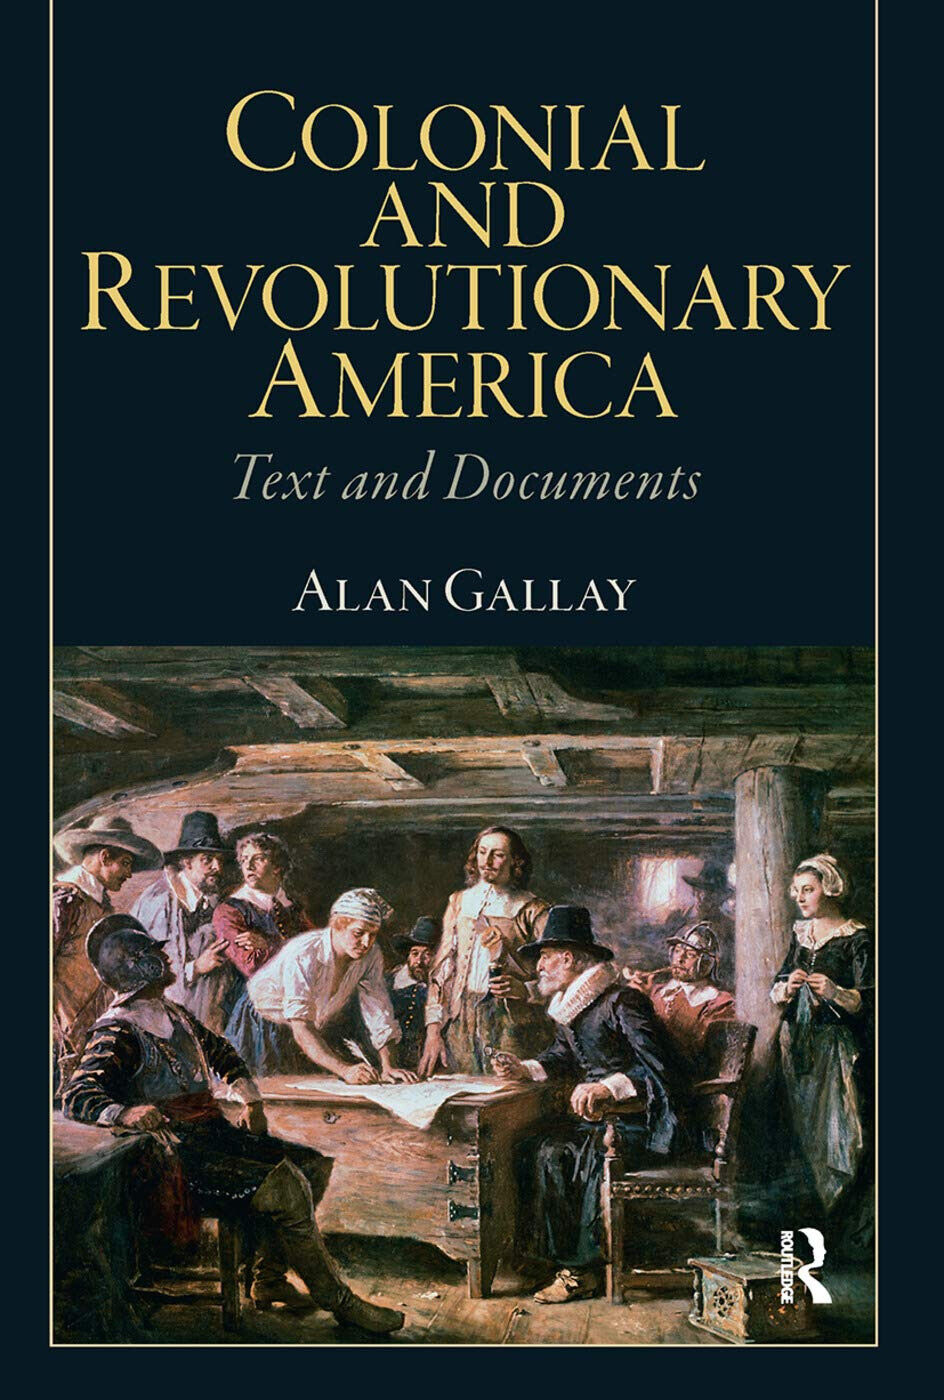 Colonial and Revolutionary America - Alan Gallay - Routledge, 2010